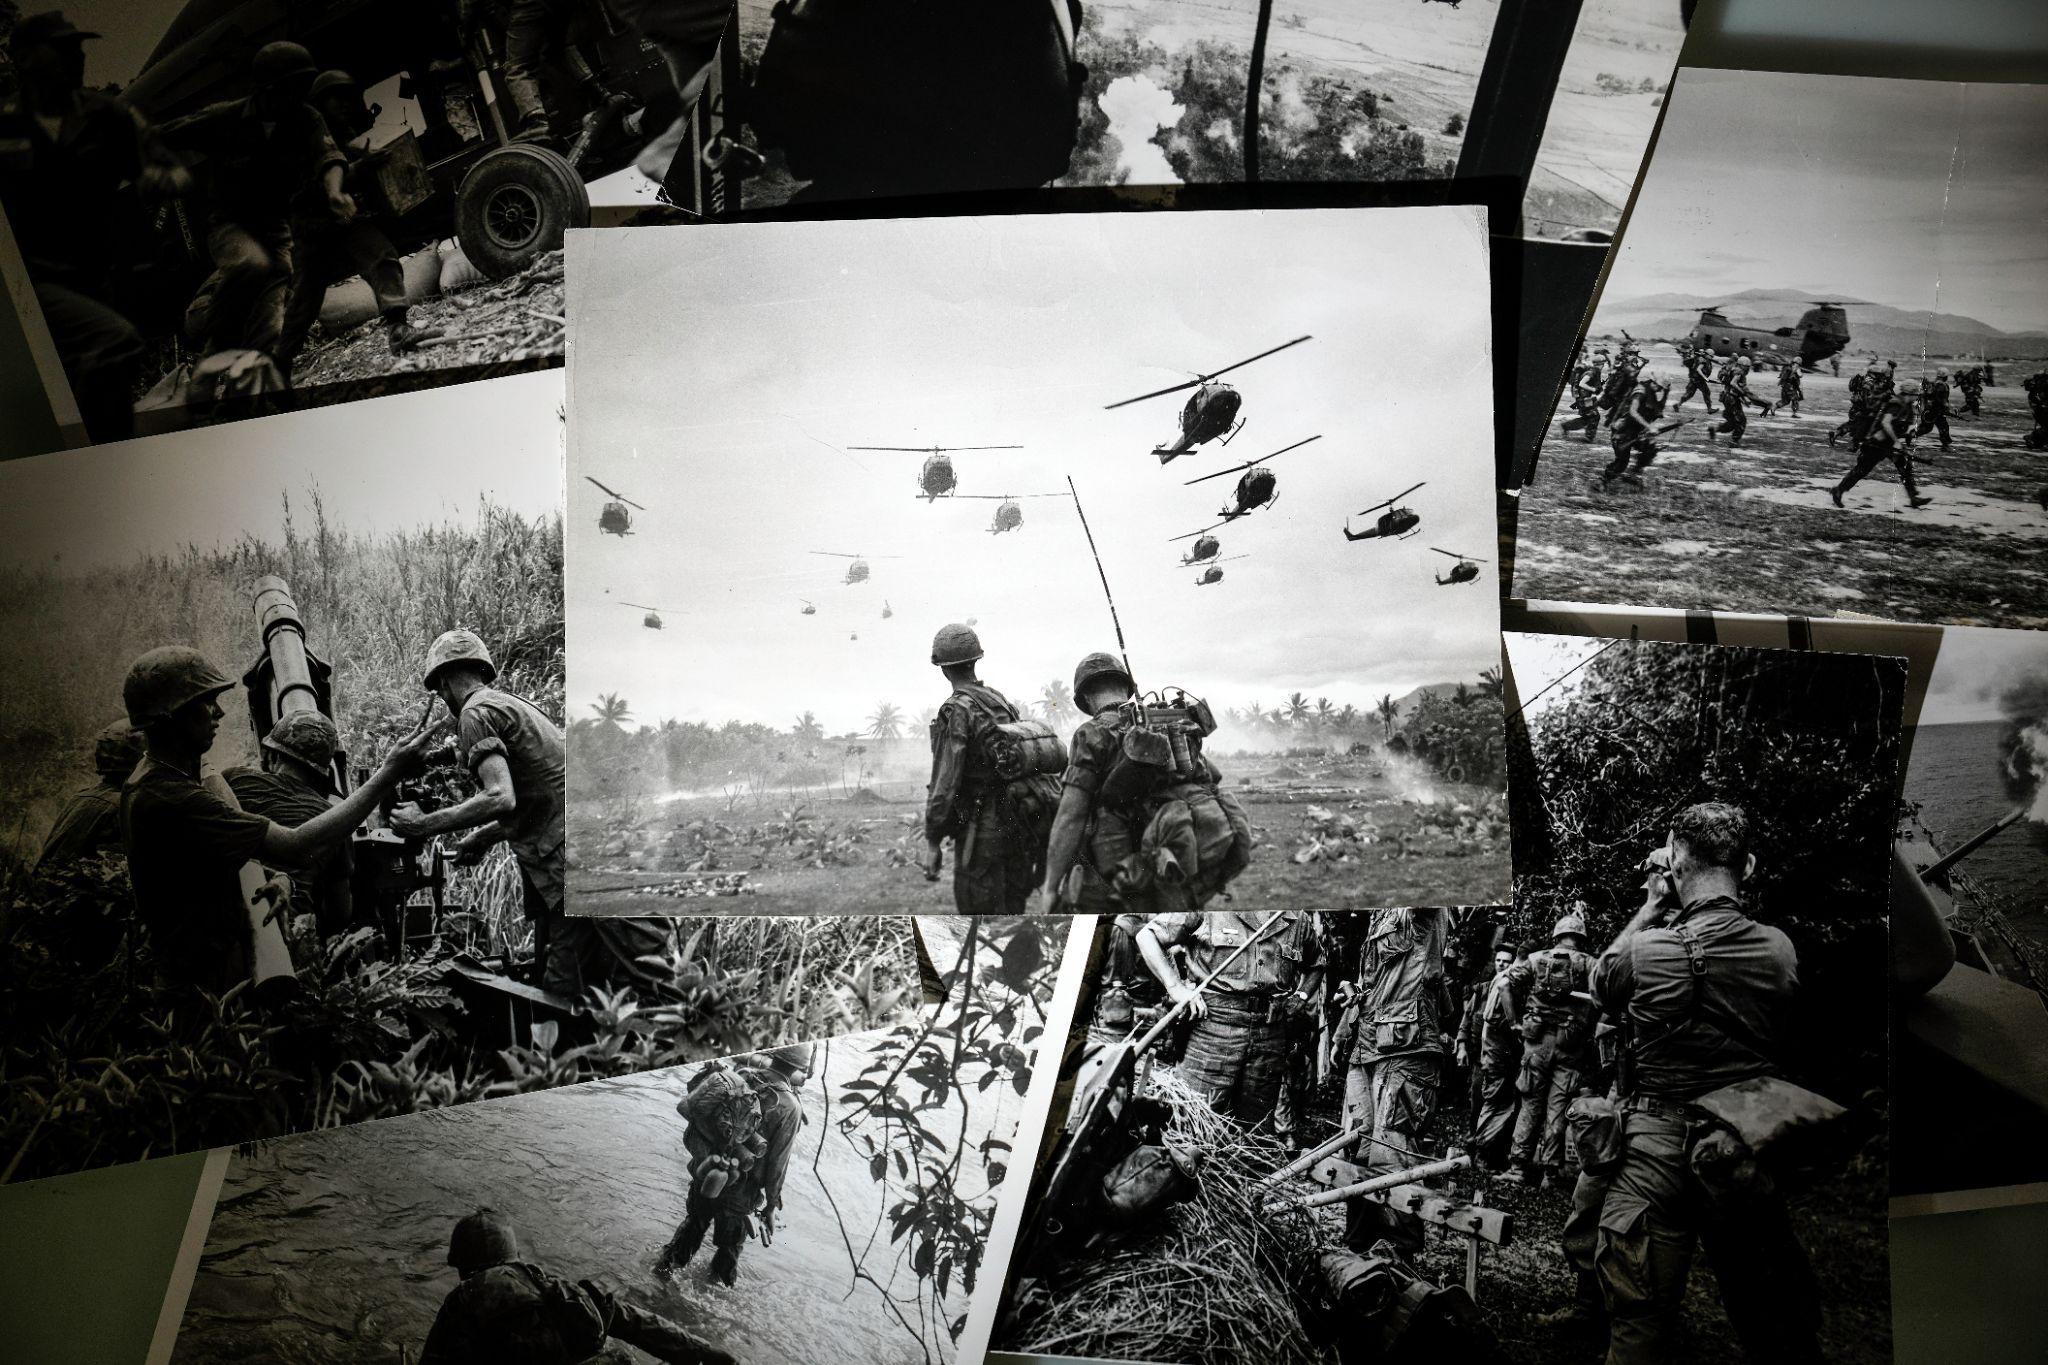 A montage of historical photos from the Vietnam War